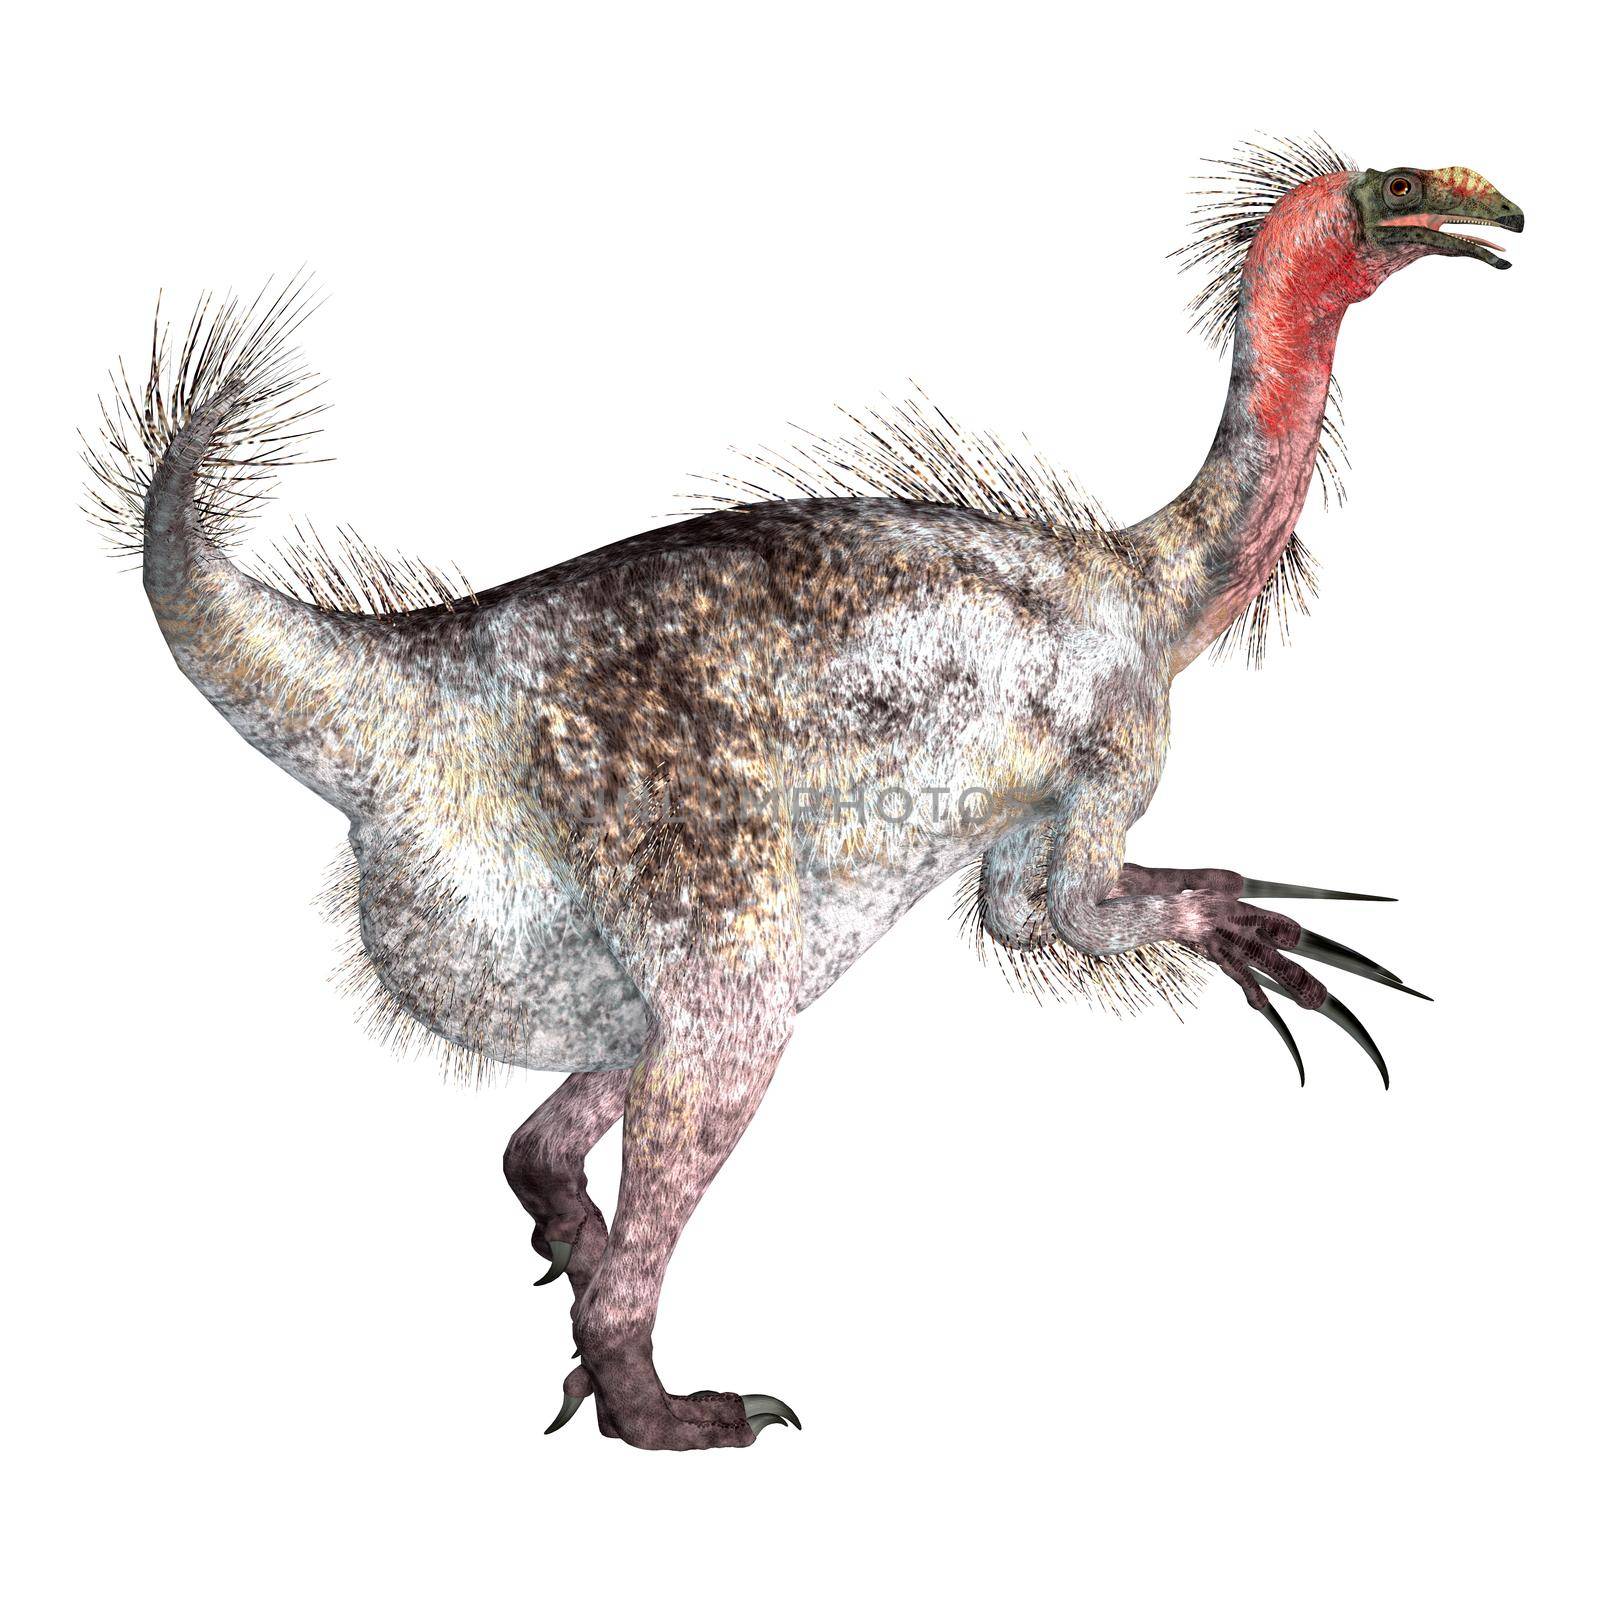 Therizinosaurus was a theropod carnivorous dinosaur that lived in Mongolia during the Cretaceous Period.